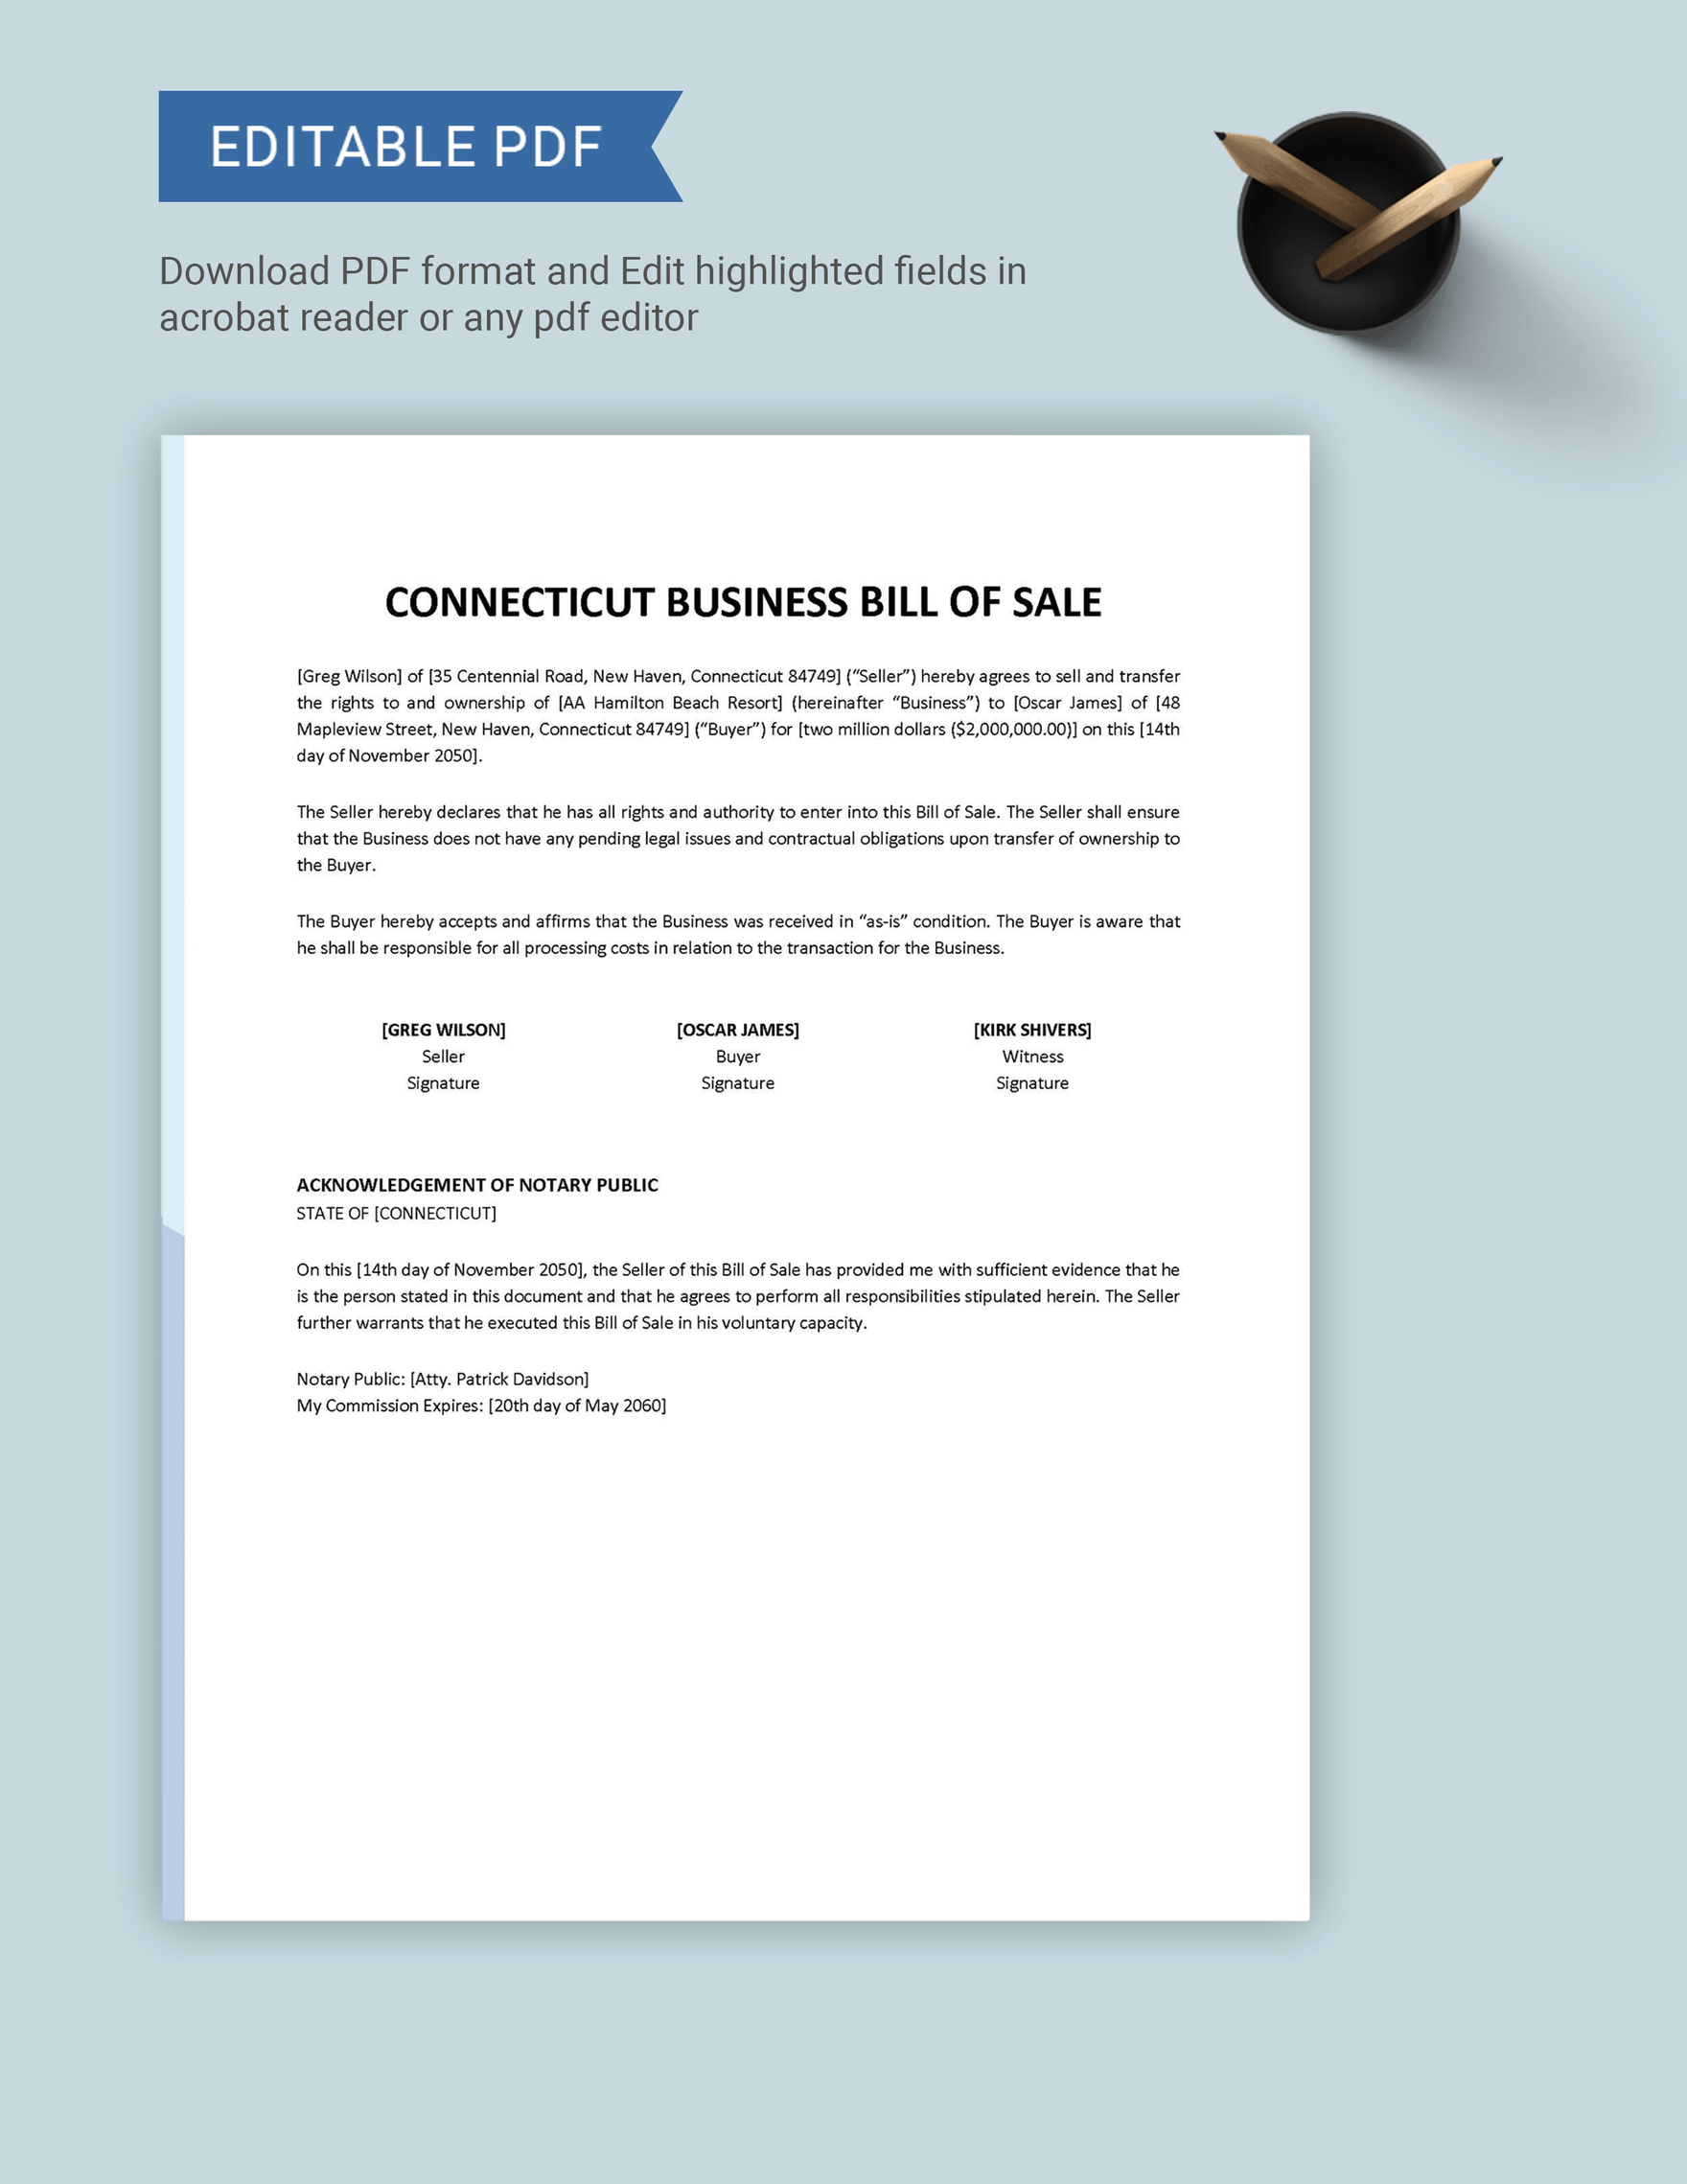 Connecticut Business Bill of Sale Template